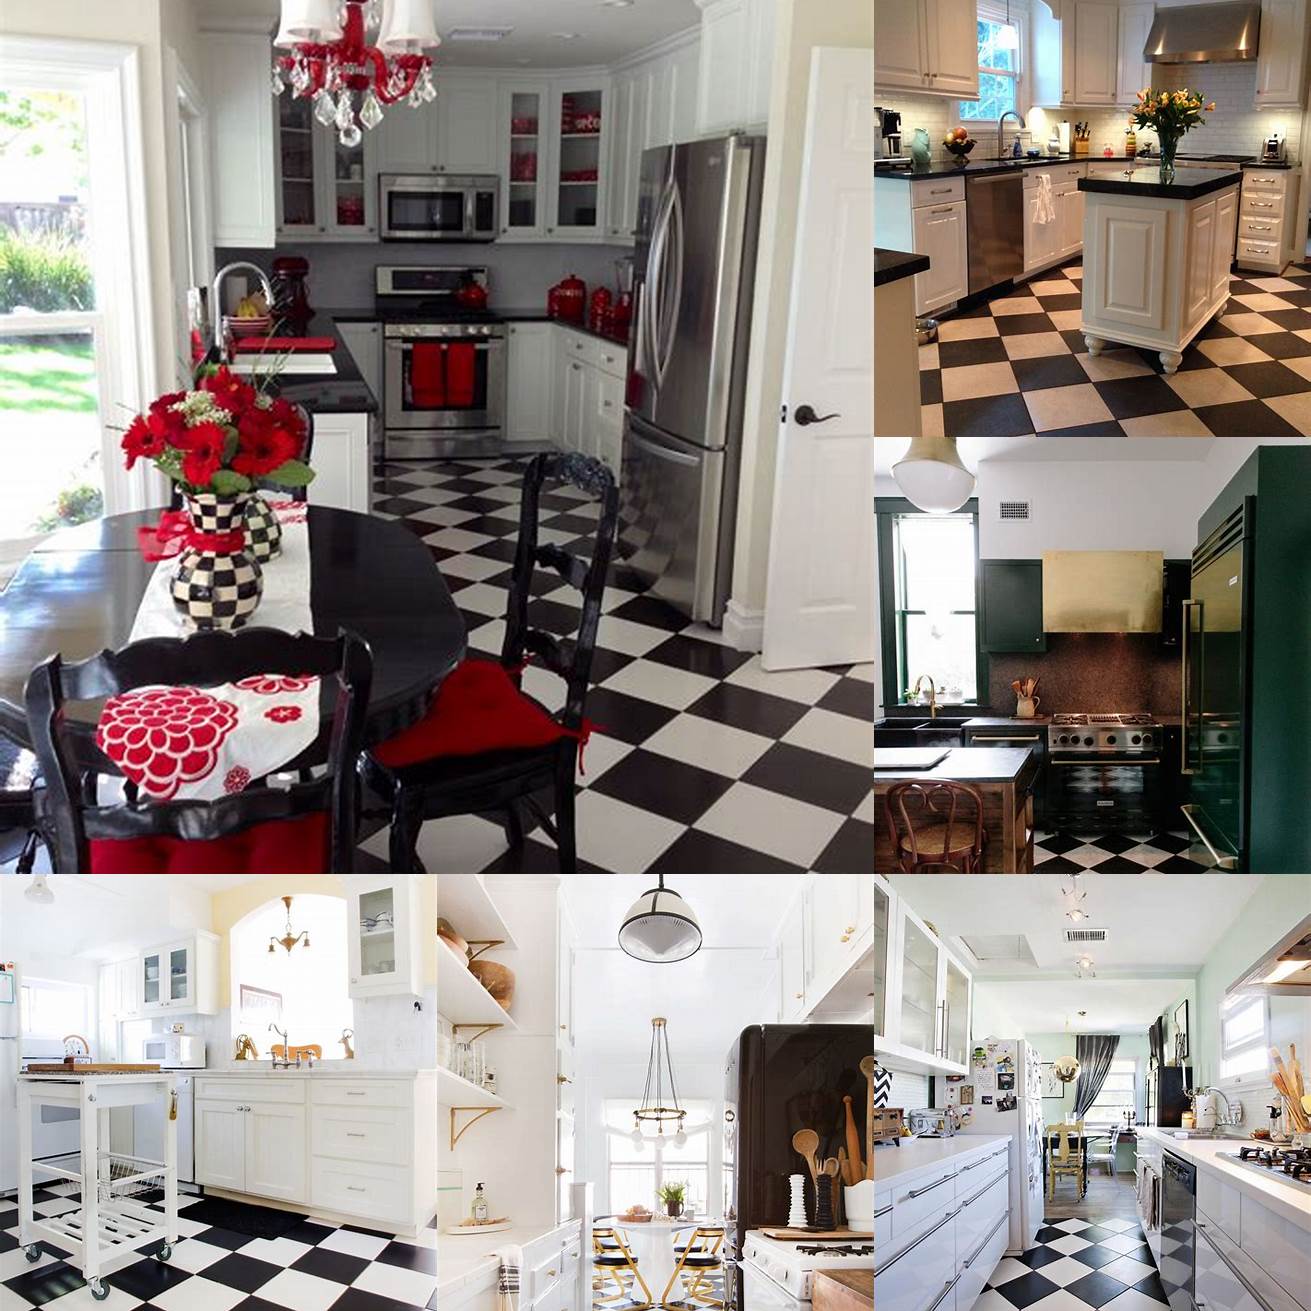 Black and white checkered kitchen floor with red accents